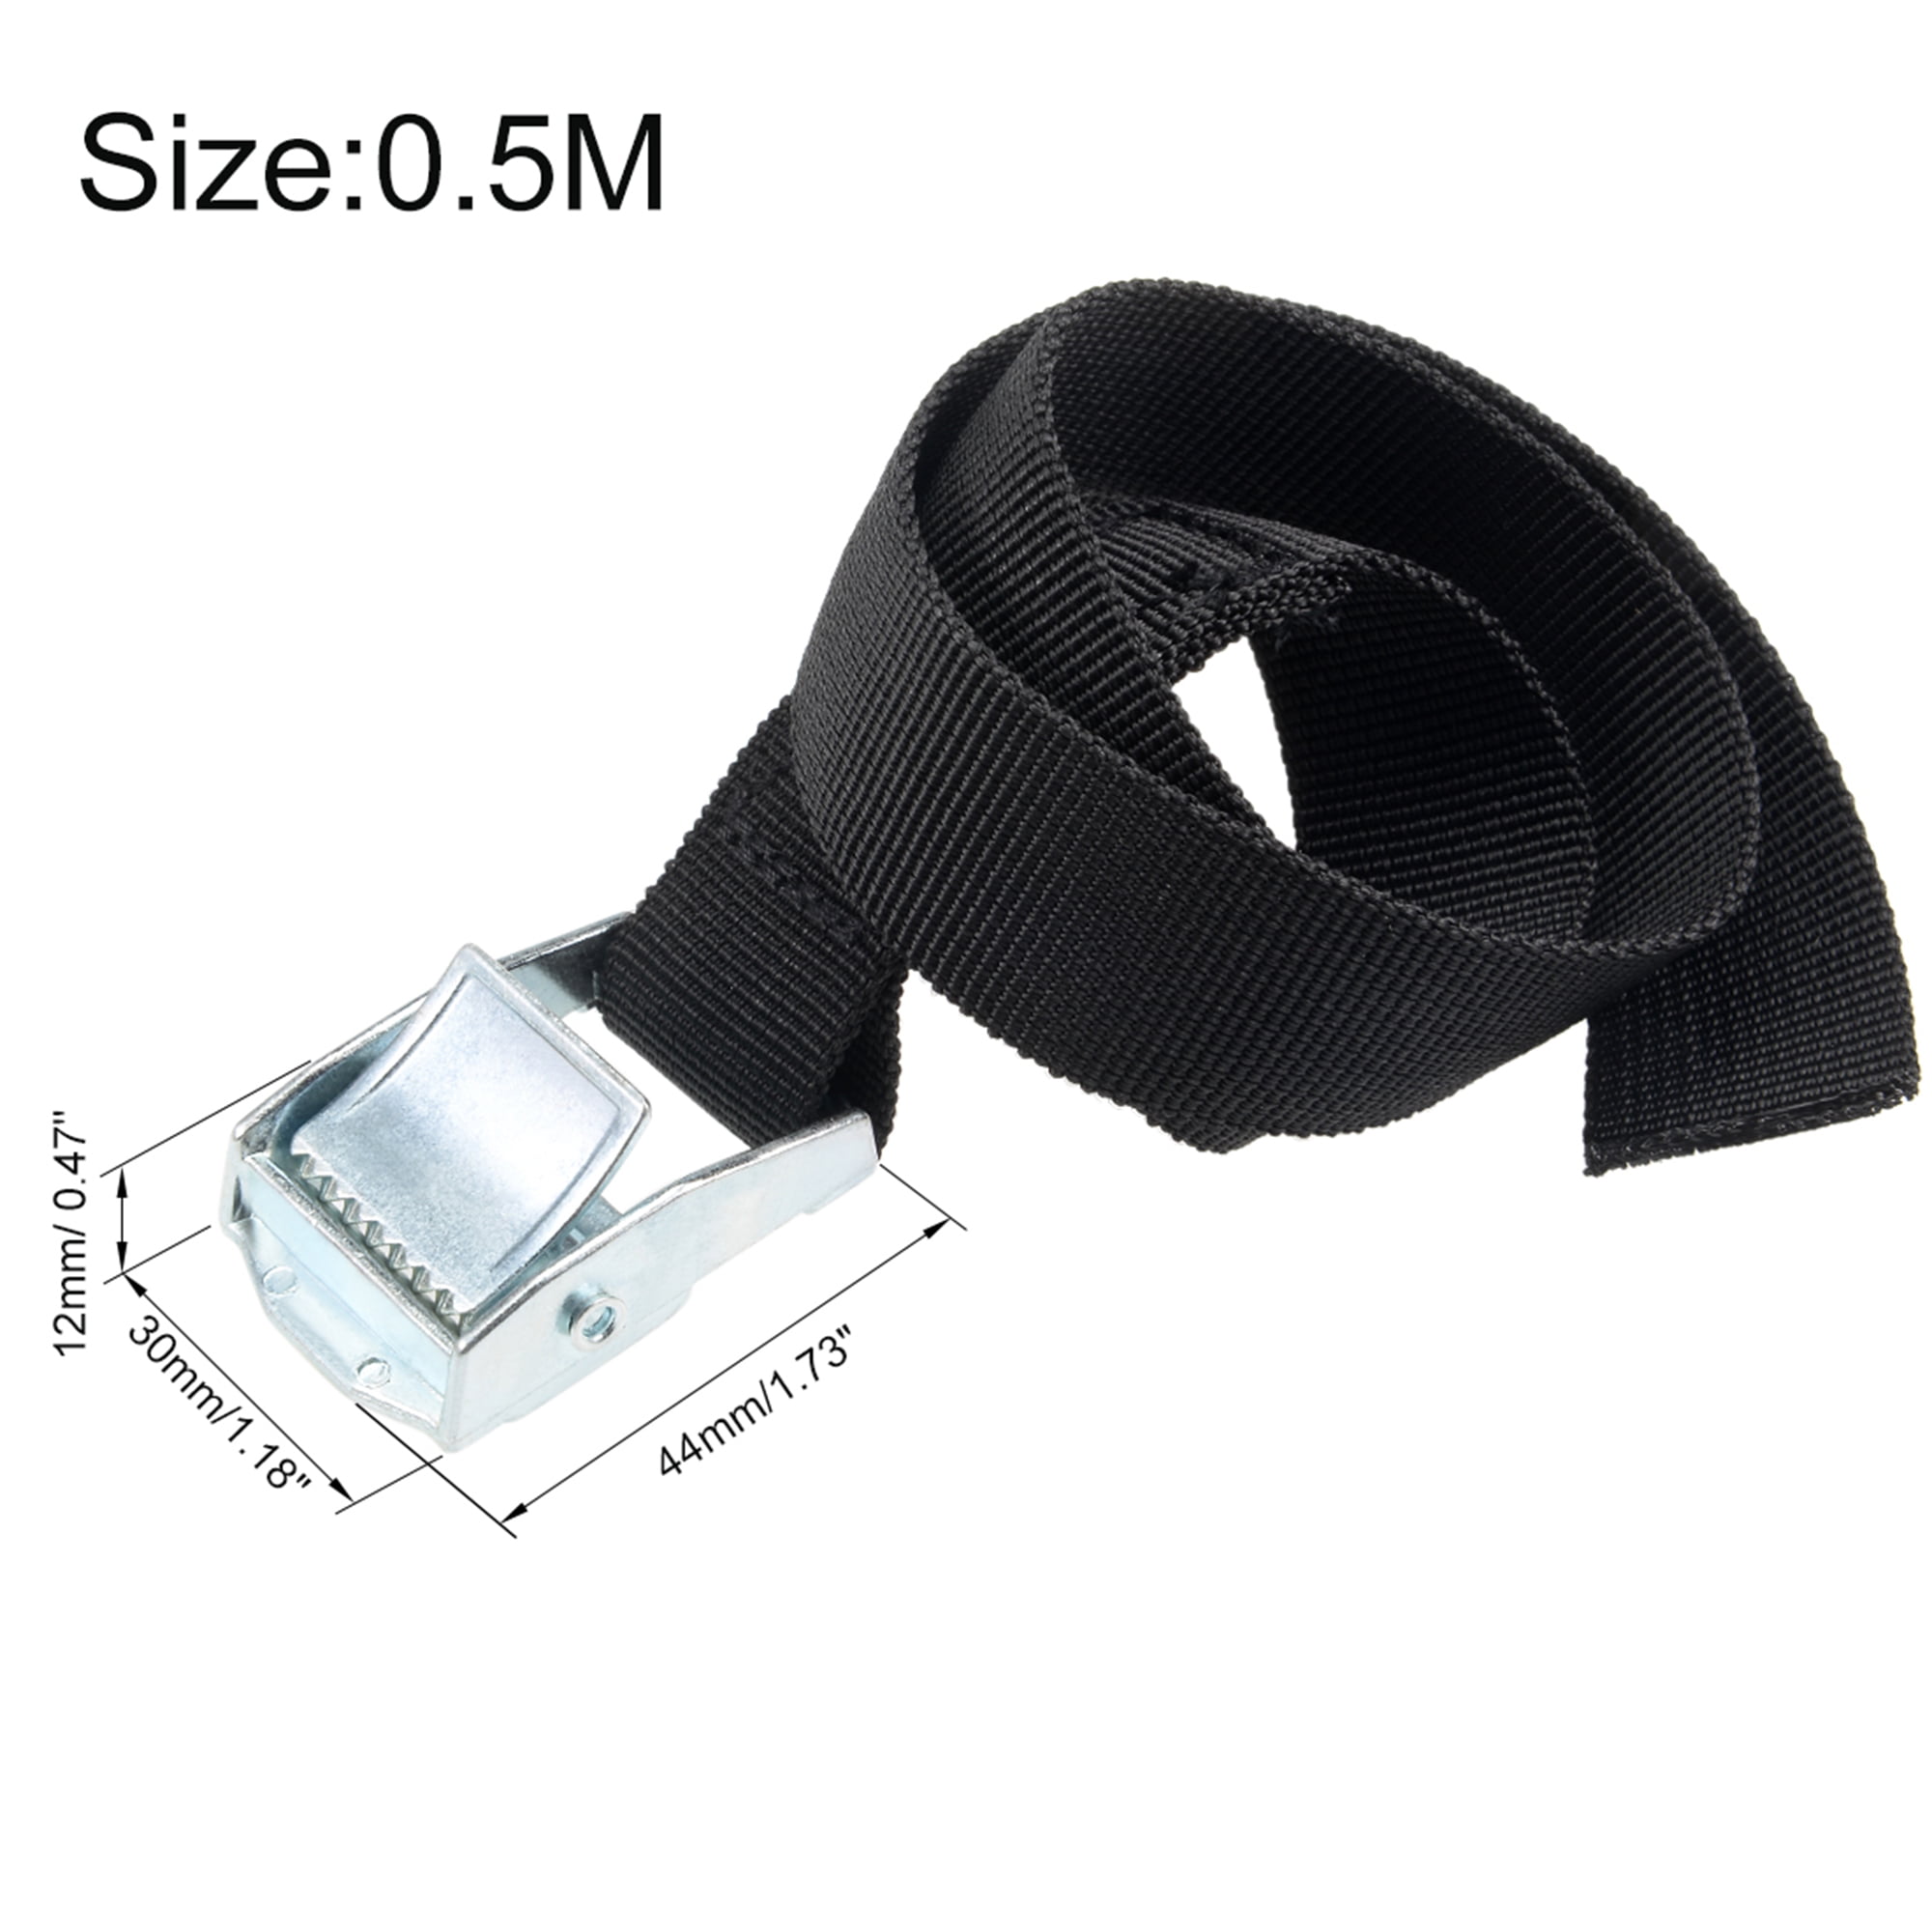 4Pcs Black uxcell 5M x 25mm Lashing Strap Cargo Tie Down Straps Cam Lock Buckle Up to 250Kg 